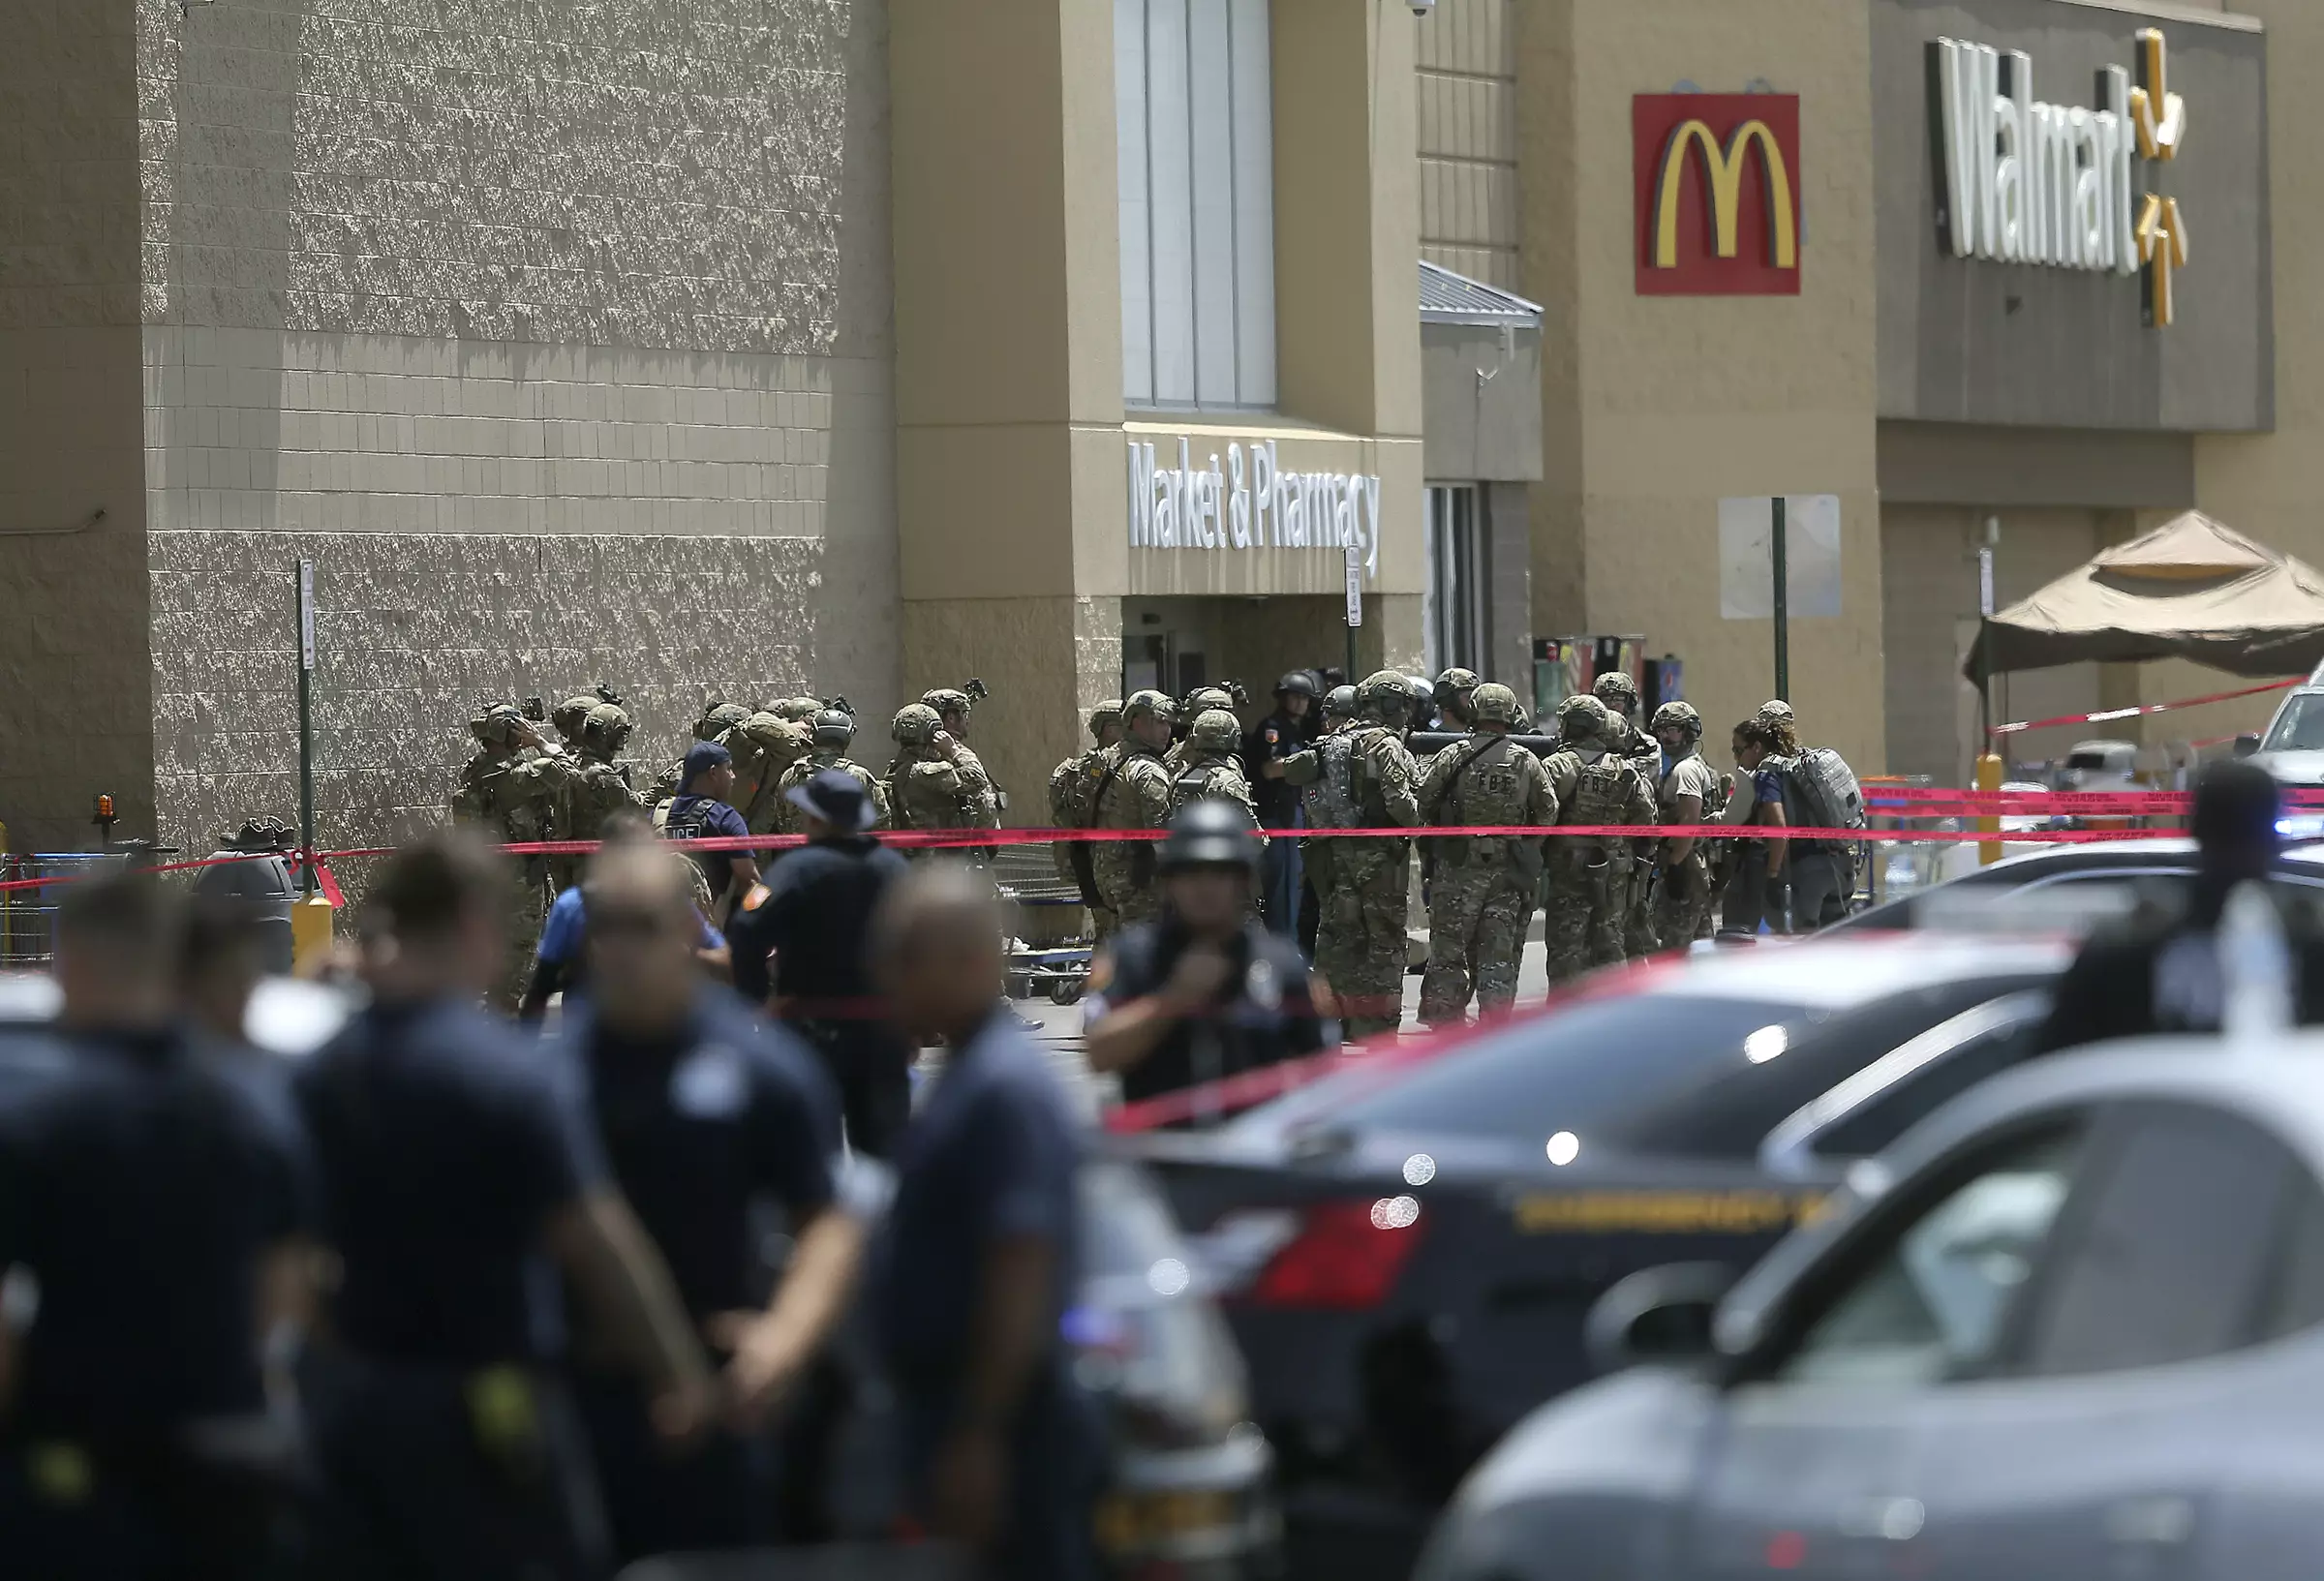 The soldier was shopping in a sports store when the shooting began.